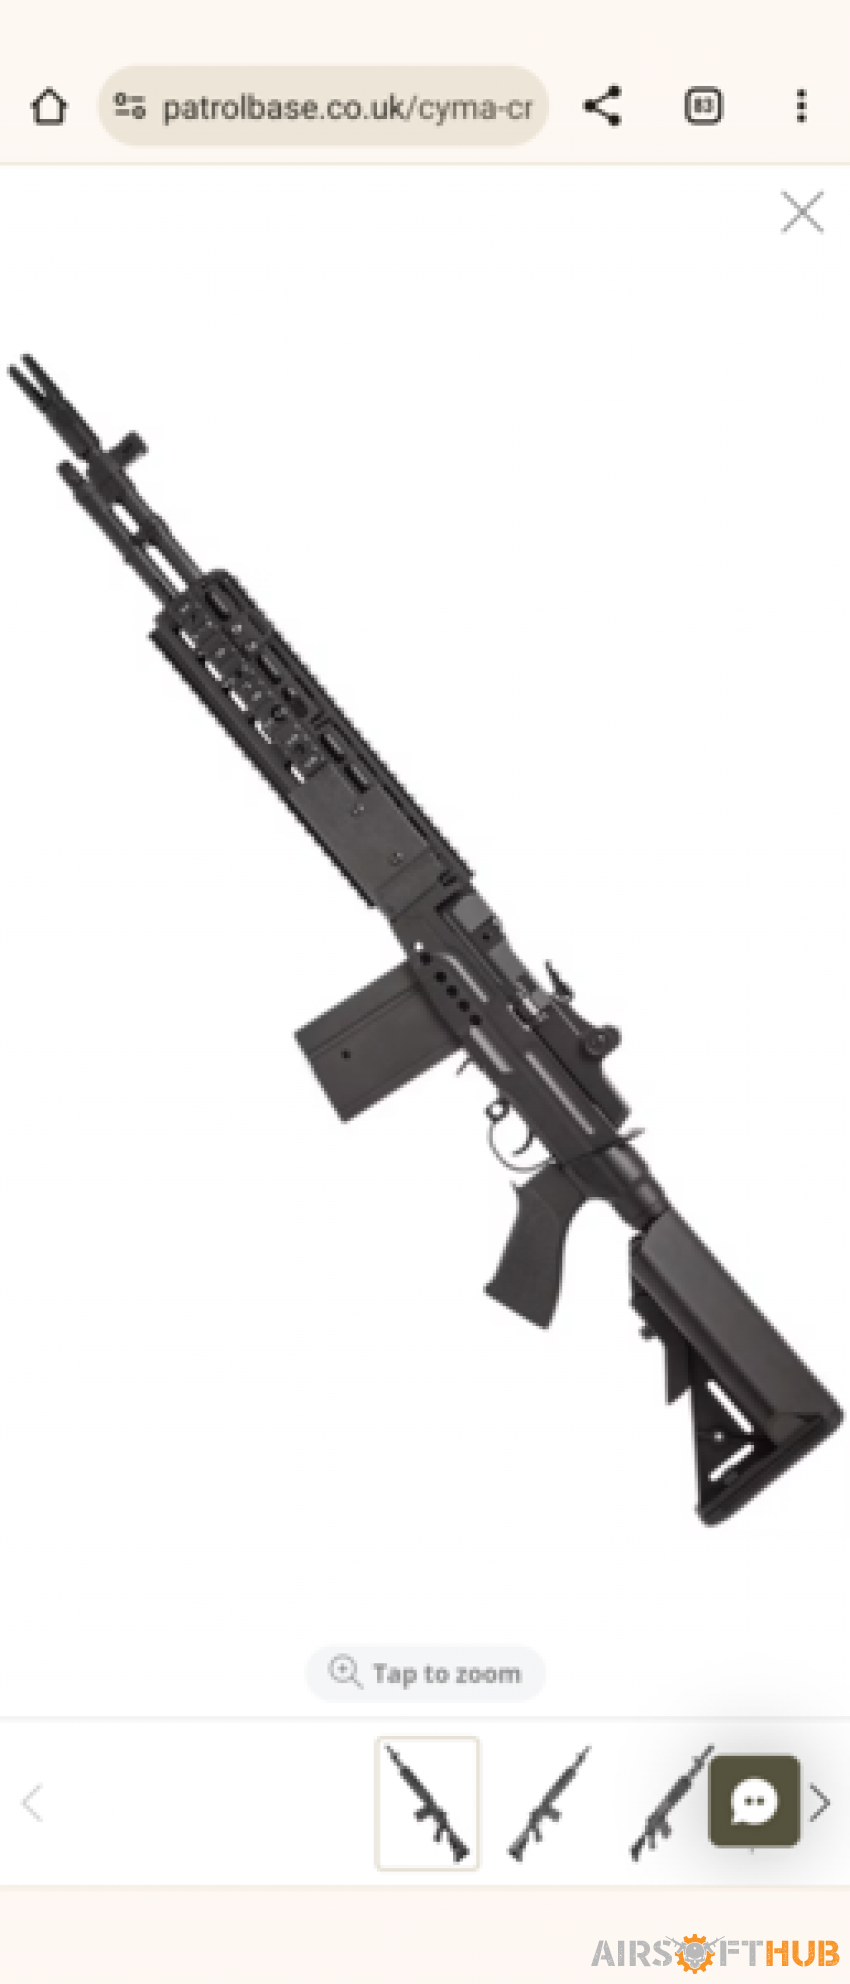 Wanted - M14 EBR - Used airsoft equipment